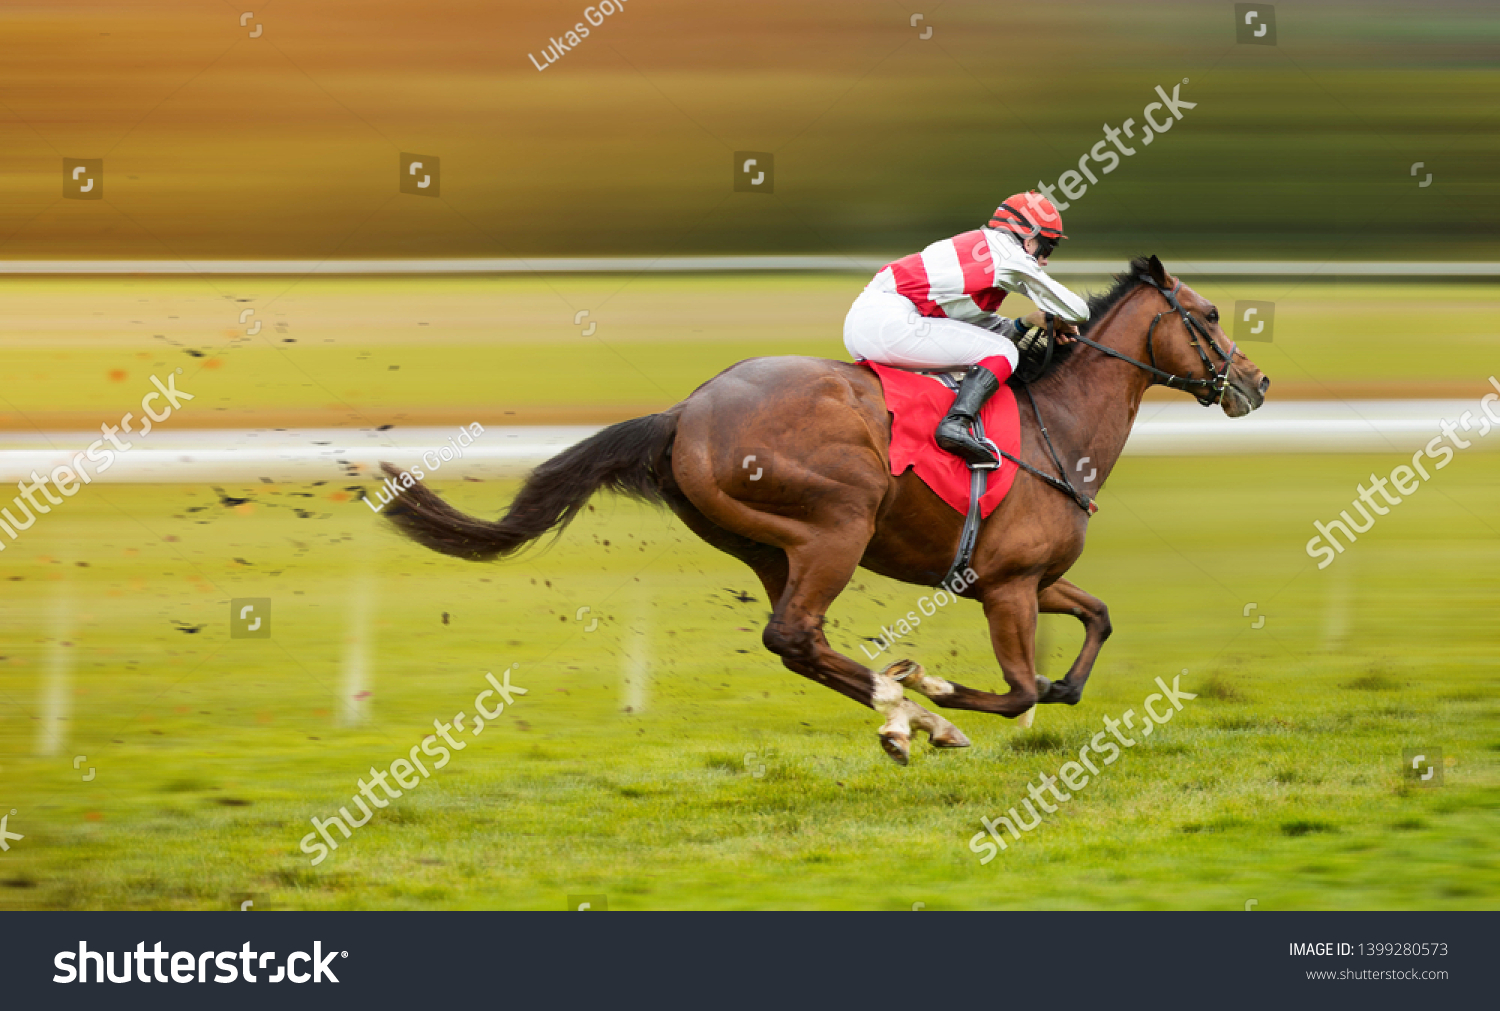 Race horse with jockey on the home straight. Shaving effect. #1399280573